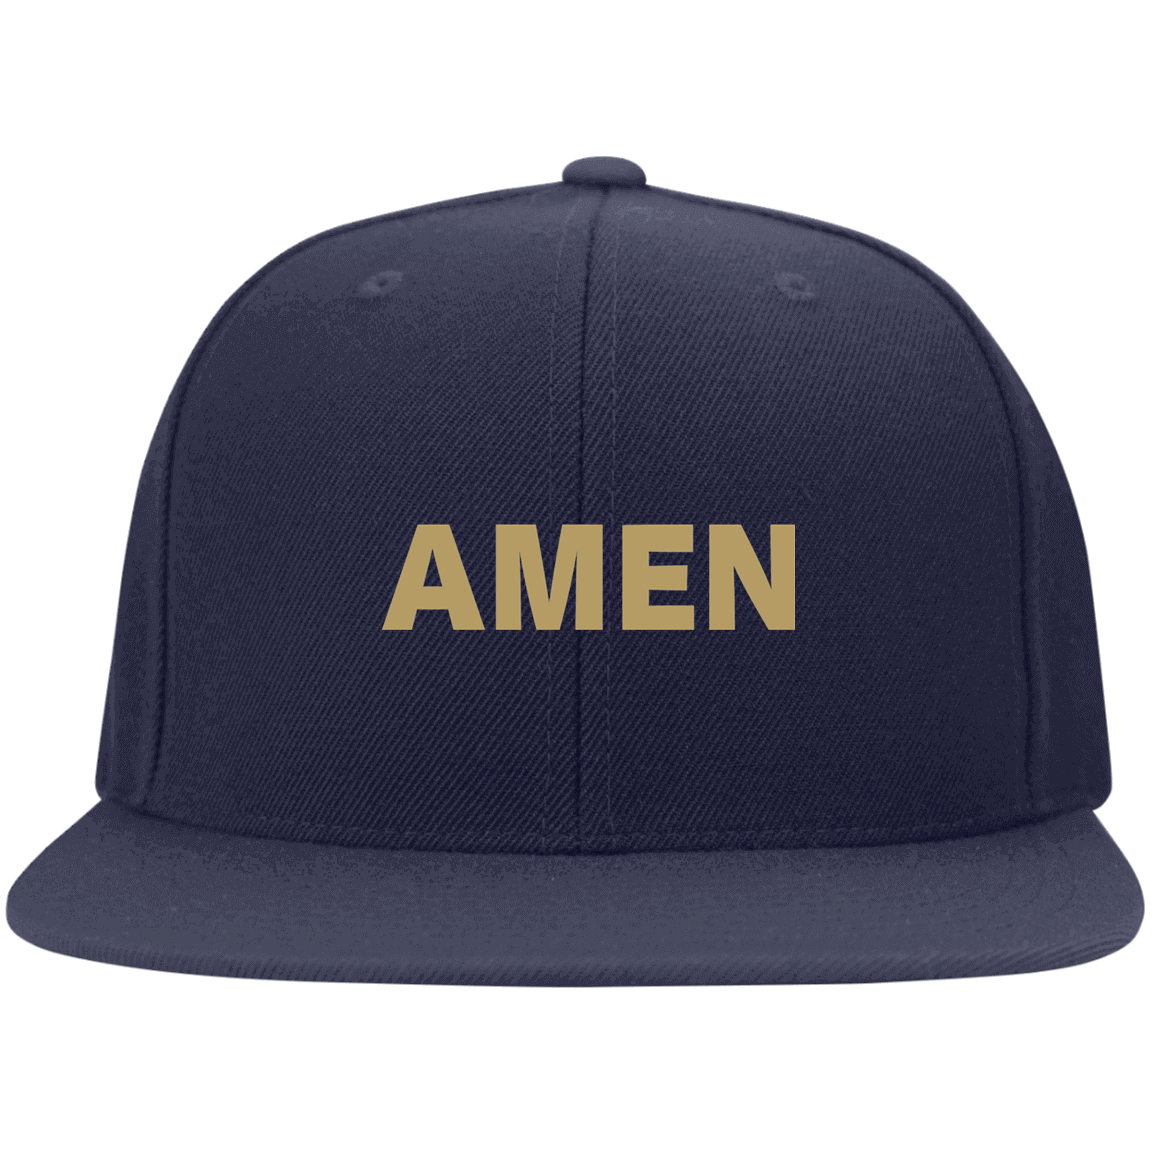 Amen Embroidered Fitted Cap